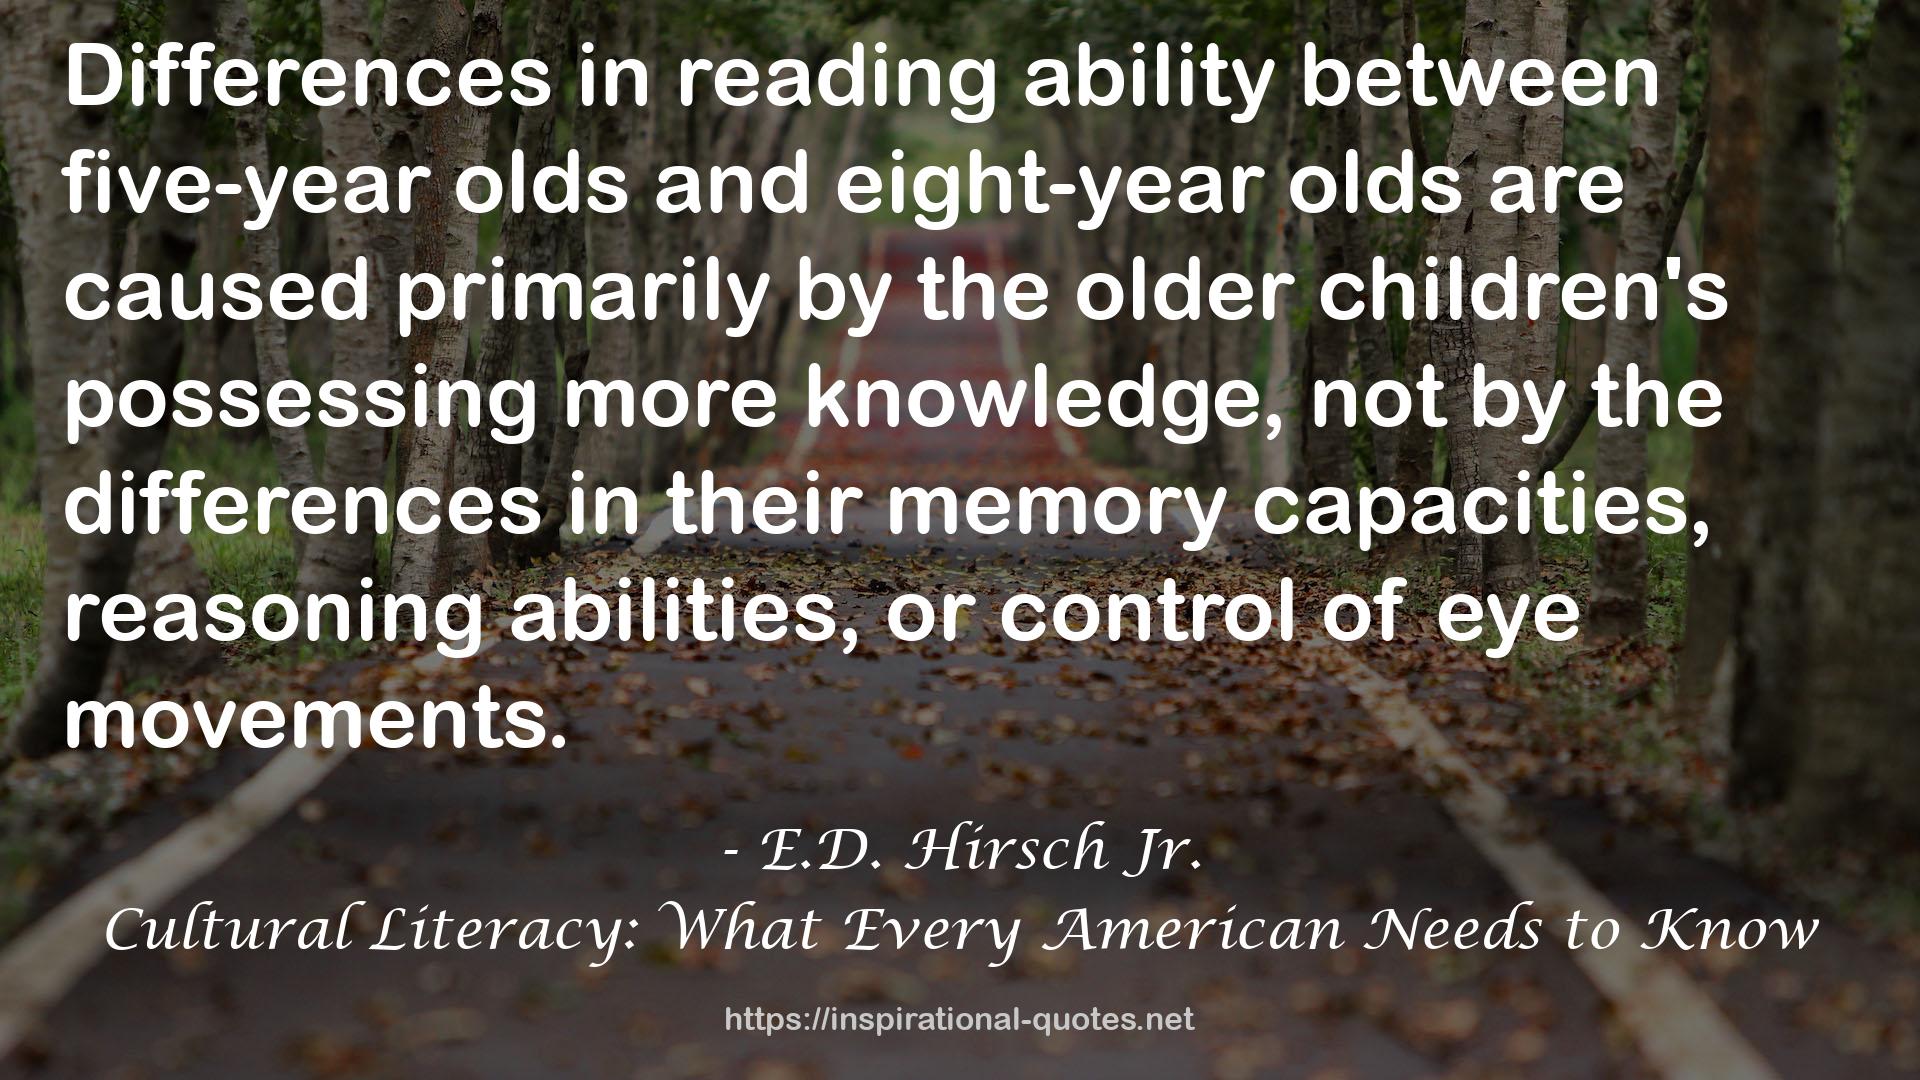 Cultural Literacy: What Every American Needs to Know QUOTES